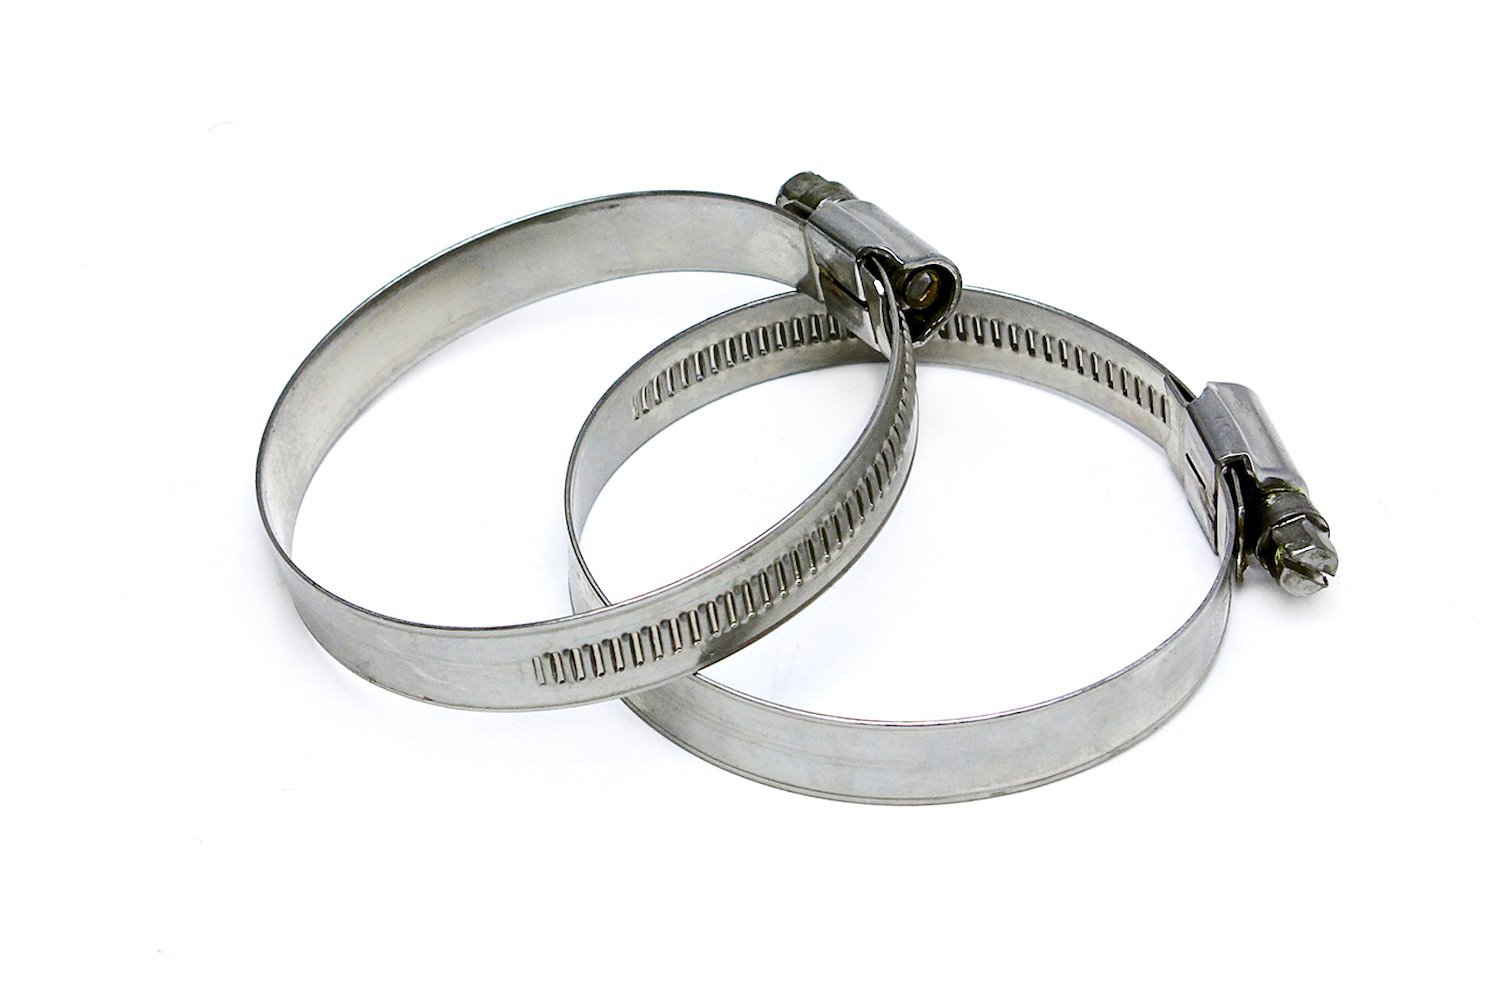 EMSC-80-100x2 Embossed Hose Clamp, Stainless Steel Embossed Hose Clamp, Size #56, Effective Range: 3-1/8 in.- 4 in., 2Pc